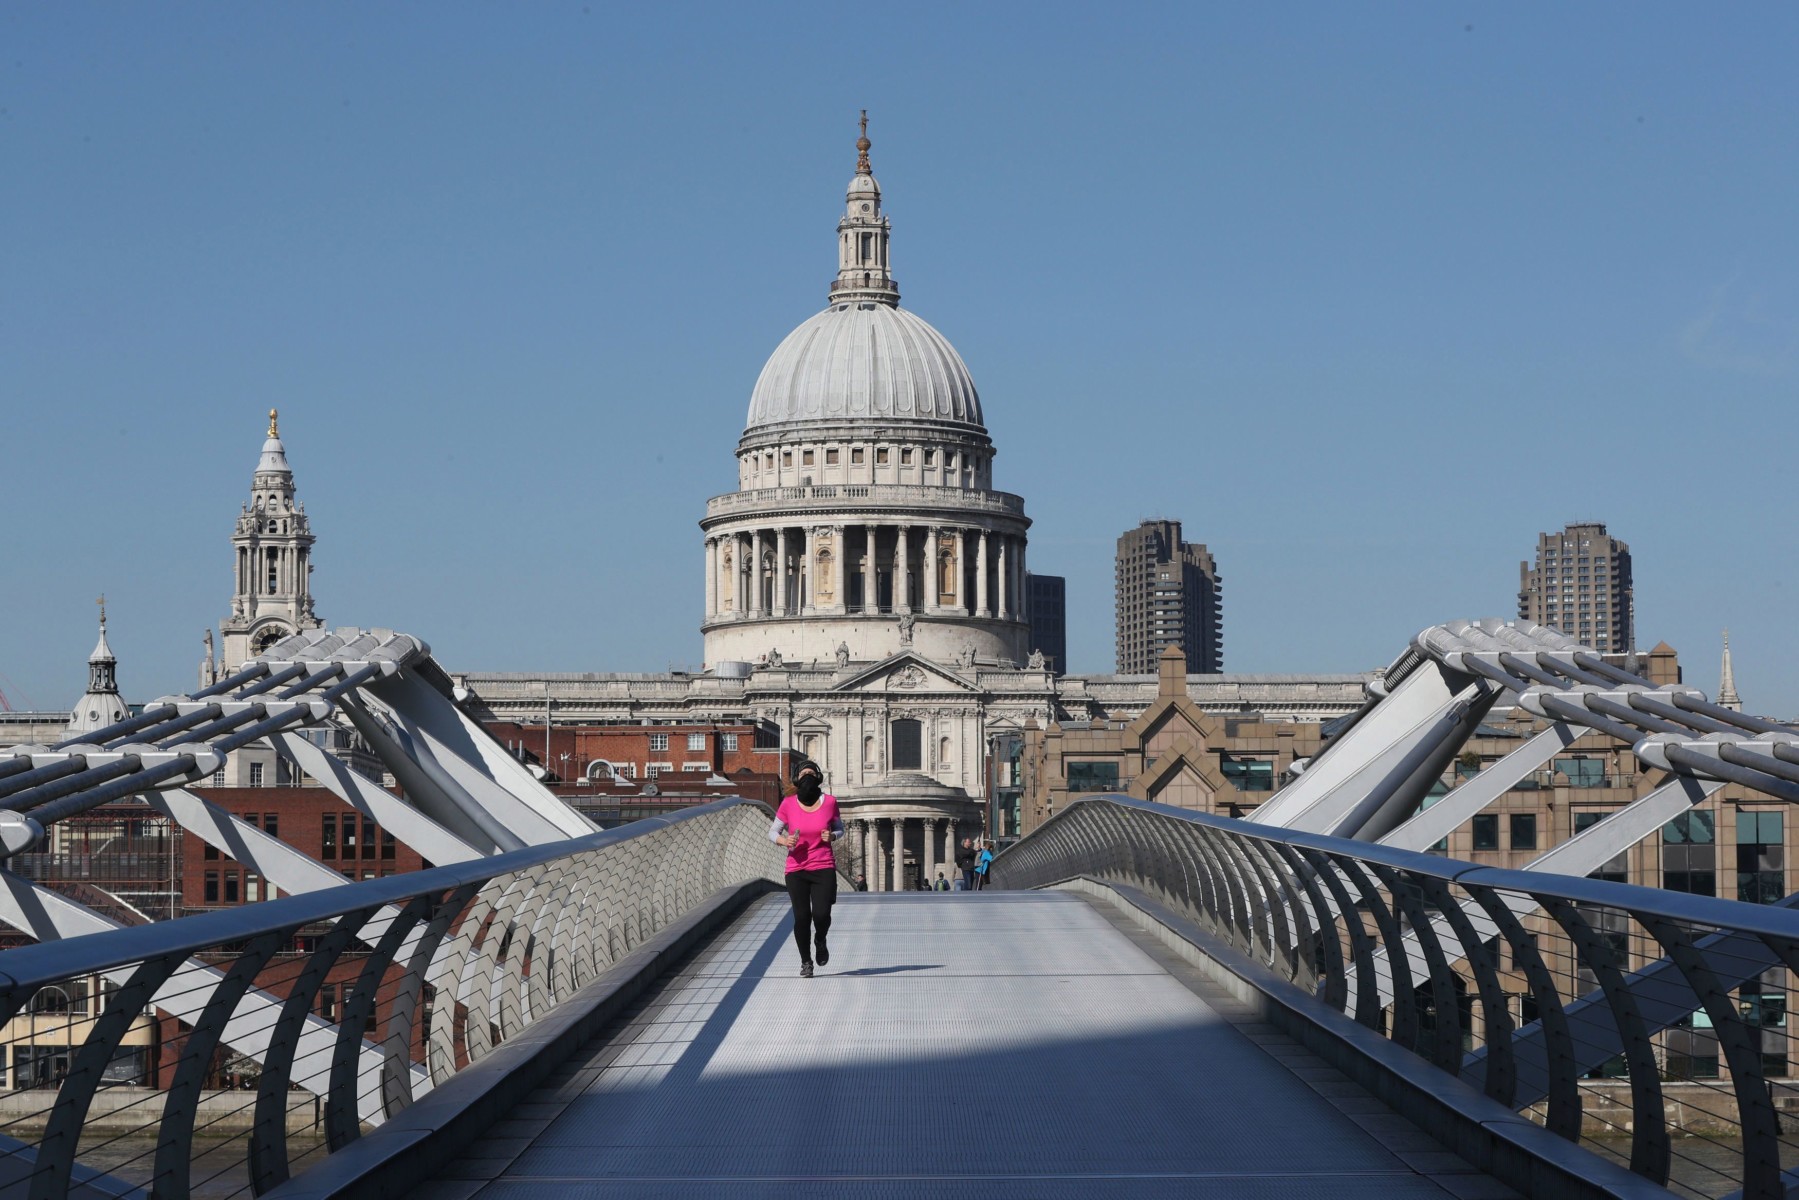 A lone jogger crosses London's Millennium Bridge in front of St Paul's Cathedral